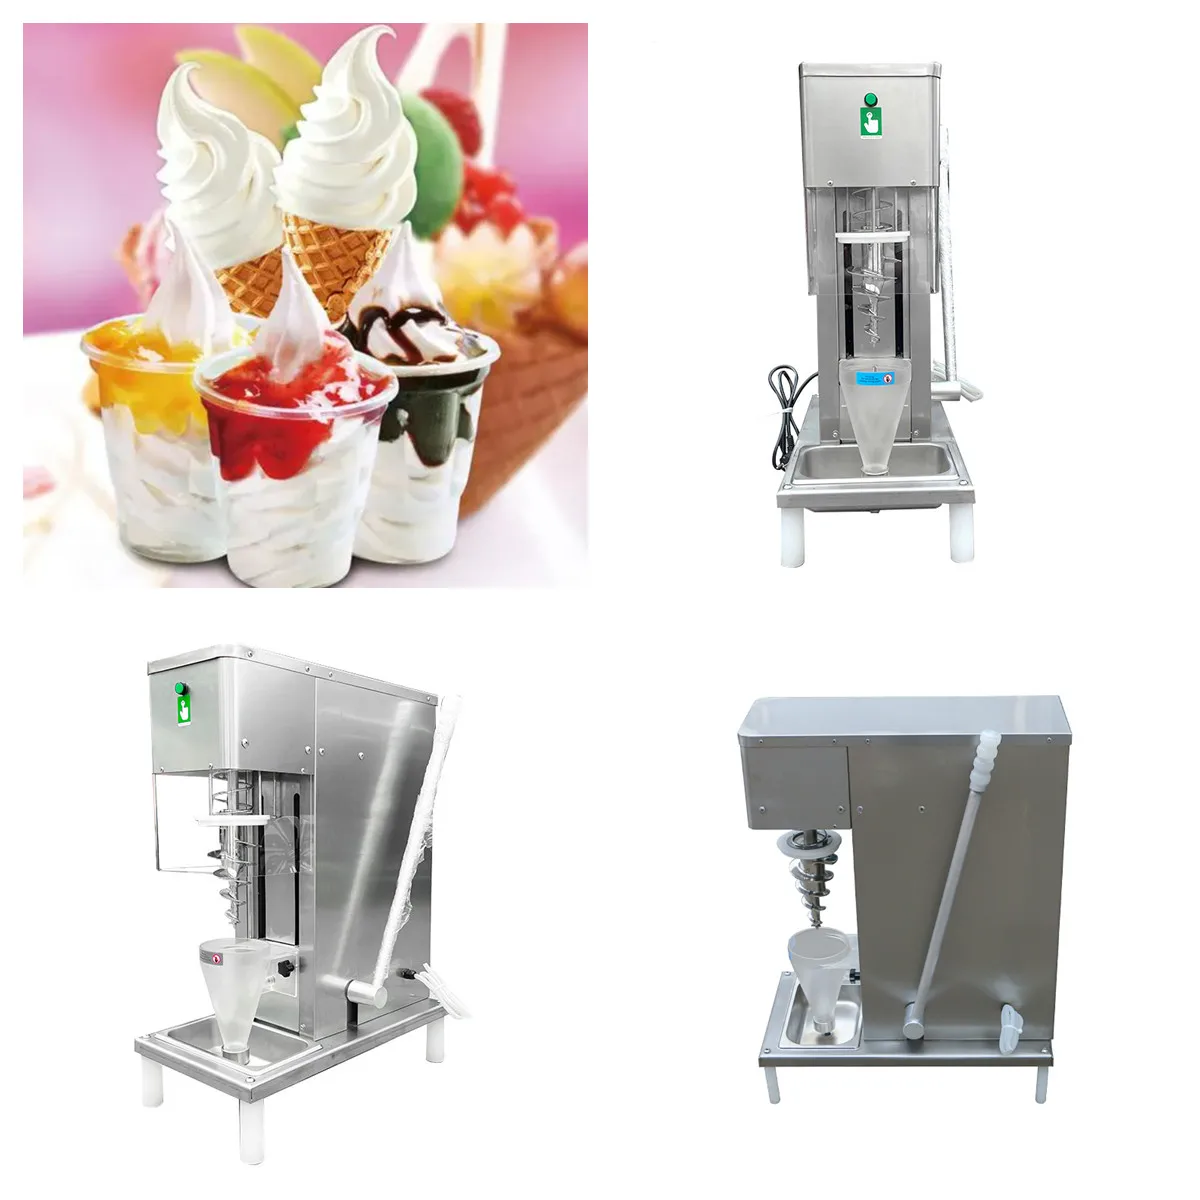 houselin coffee maker single serve with descaling reminder and self cleaning Professional Commercial Fruit Ice Cream Blender Machine With Manual Control Soft Serve Swirl Fruit Nut Yogurt Ice Cream Maker